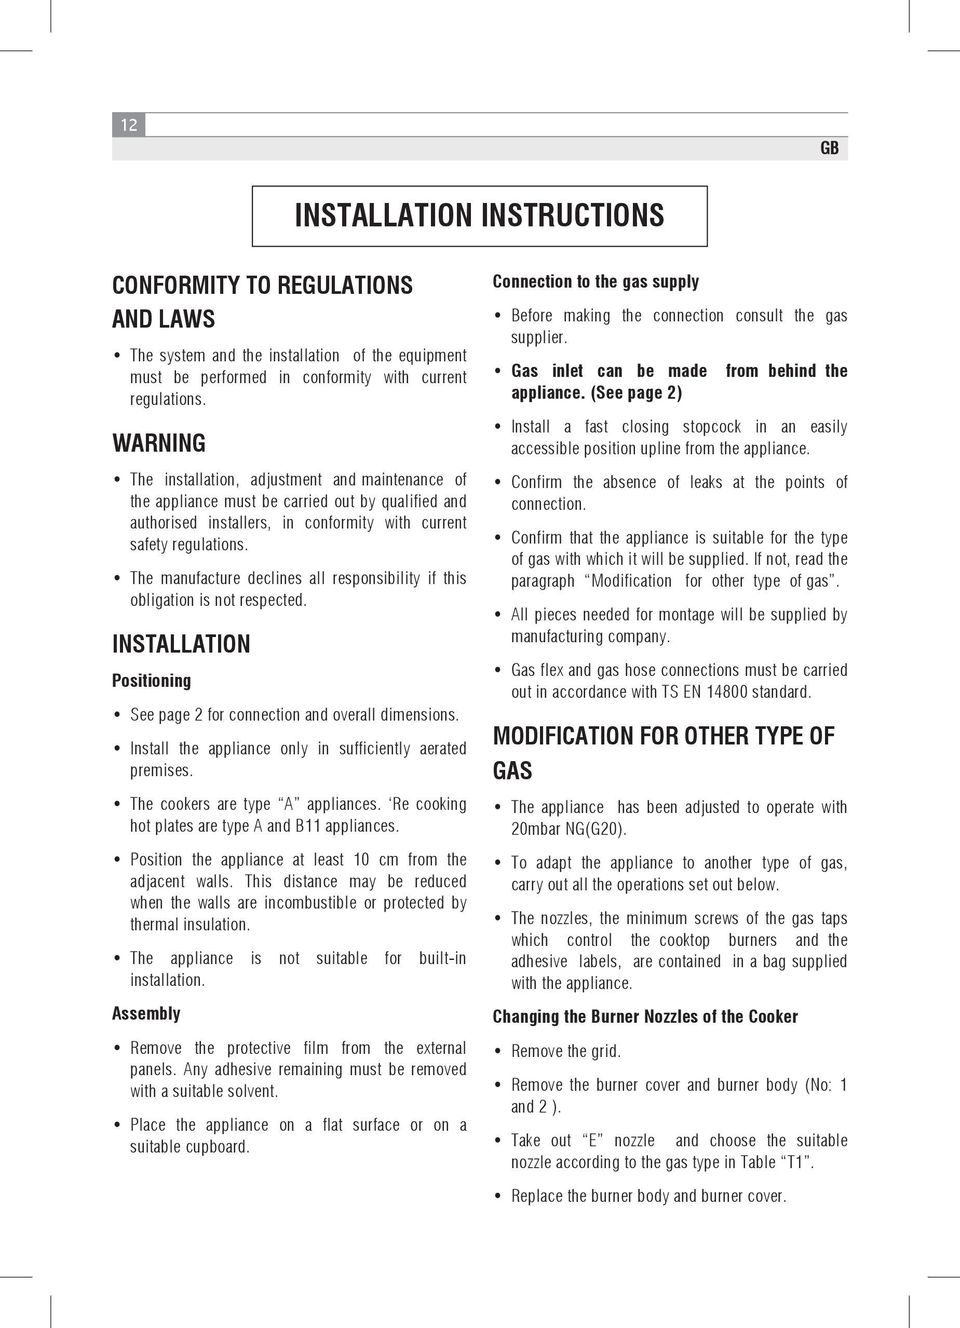 The manufacture declines all responsibility if this obligation is not respected. INSTALLATION Positioning See page 2 for connection and overall dimensions.